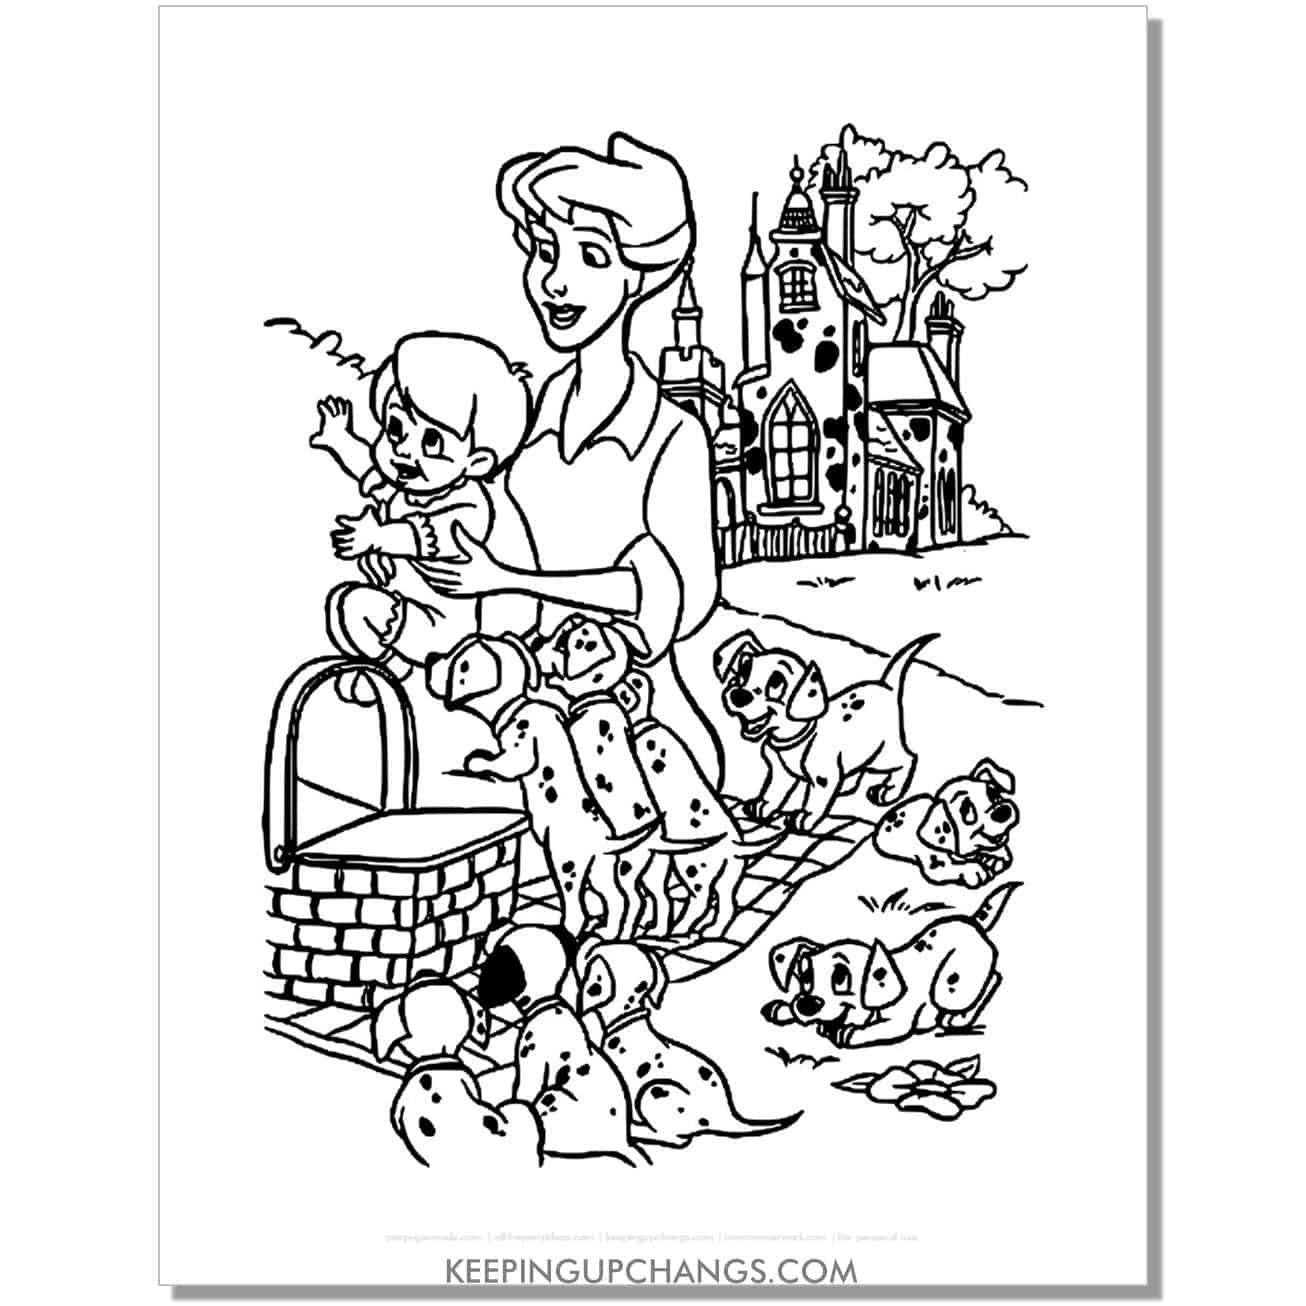 free anita radcliffe taking son out on picnic with 101 dalmations coloring page, sheet.